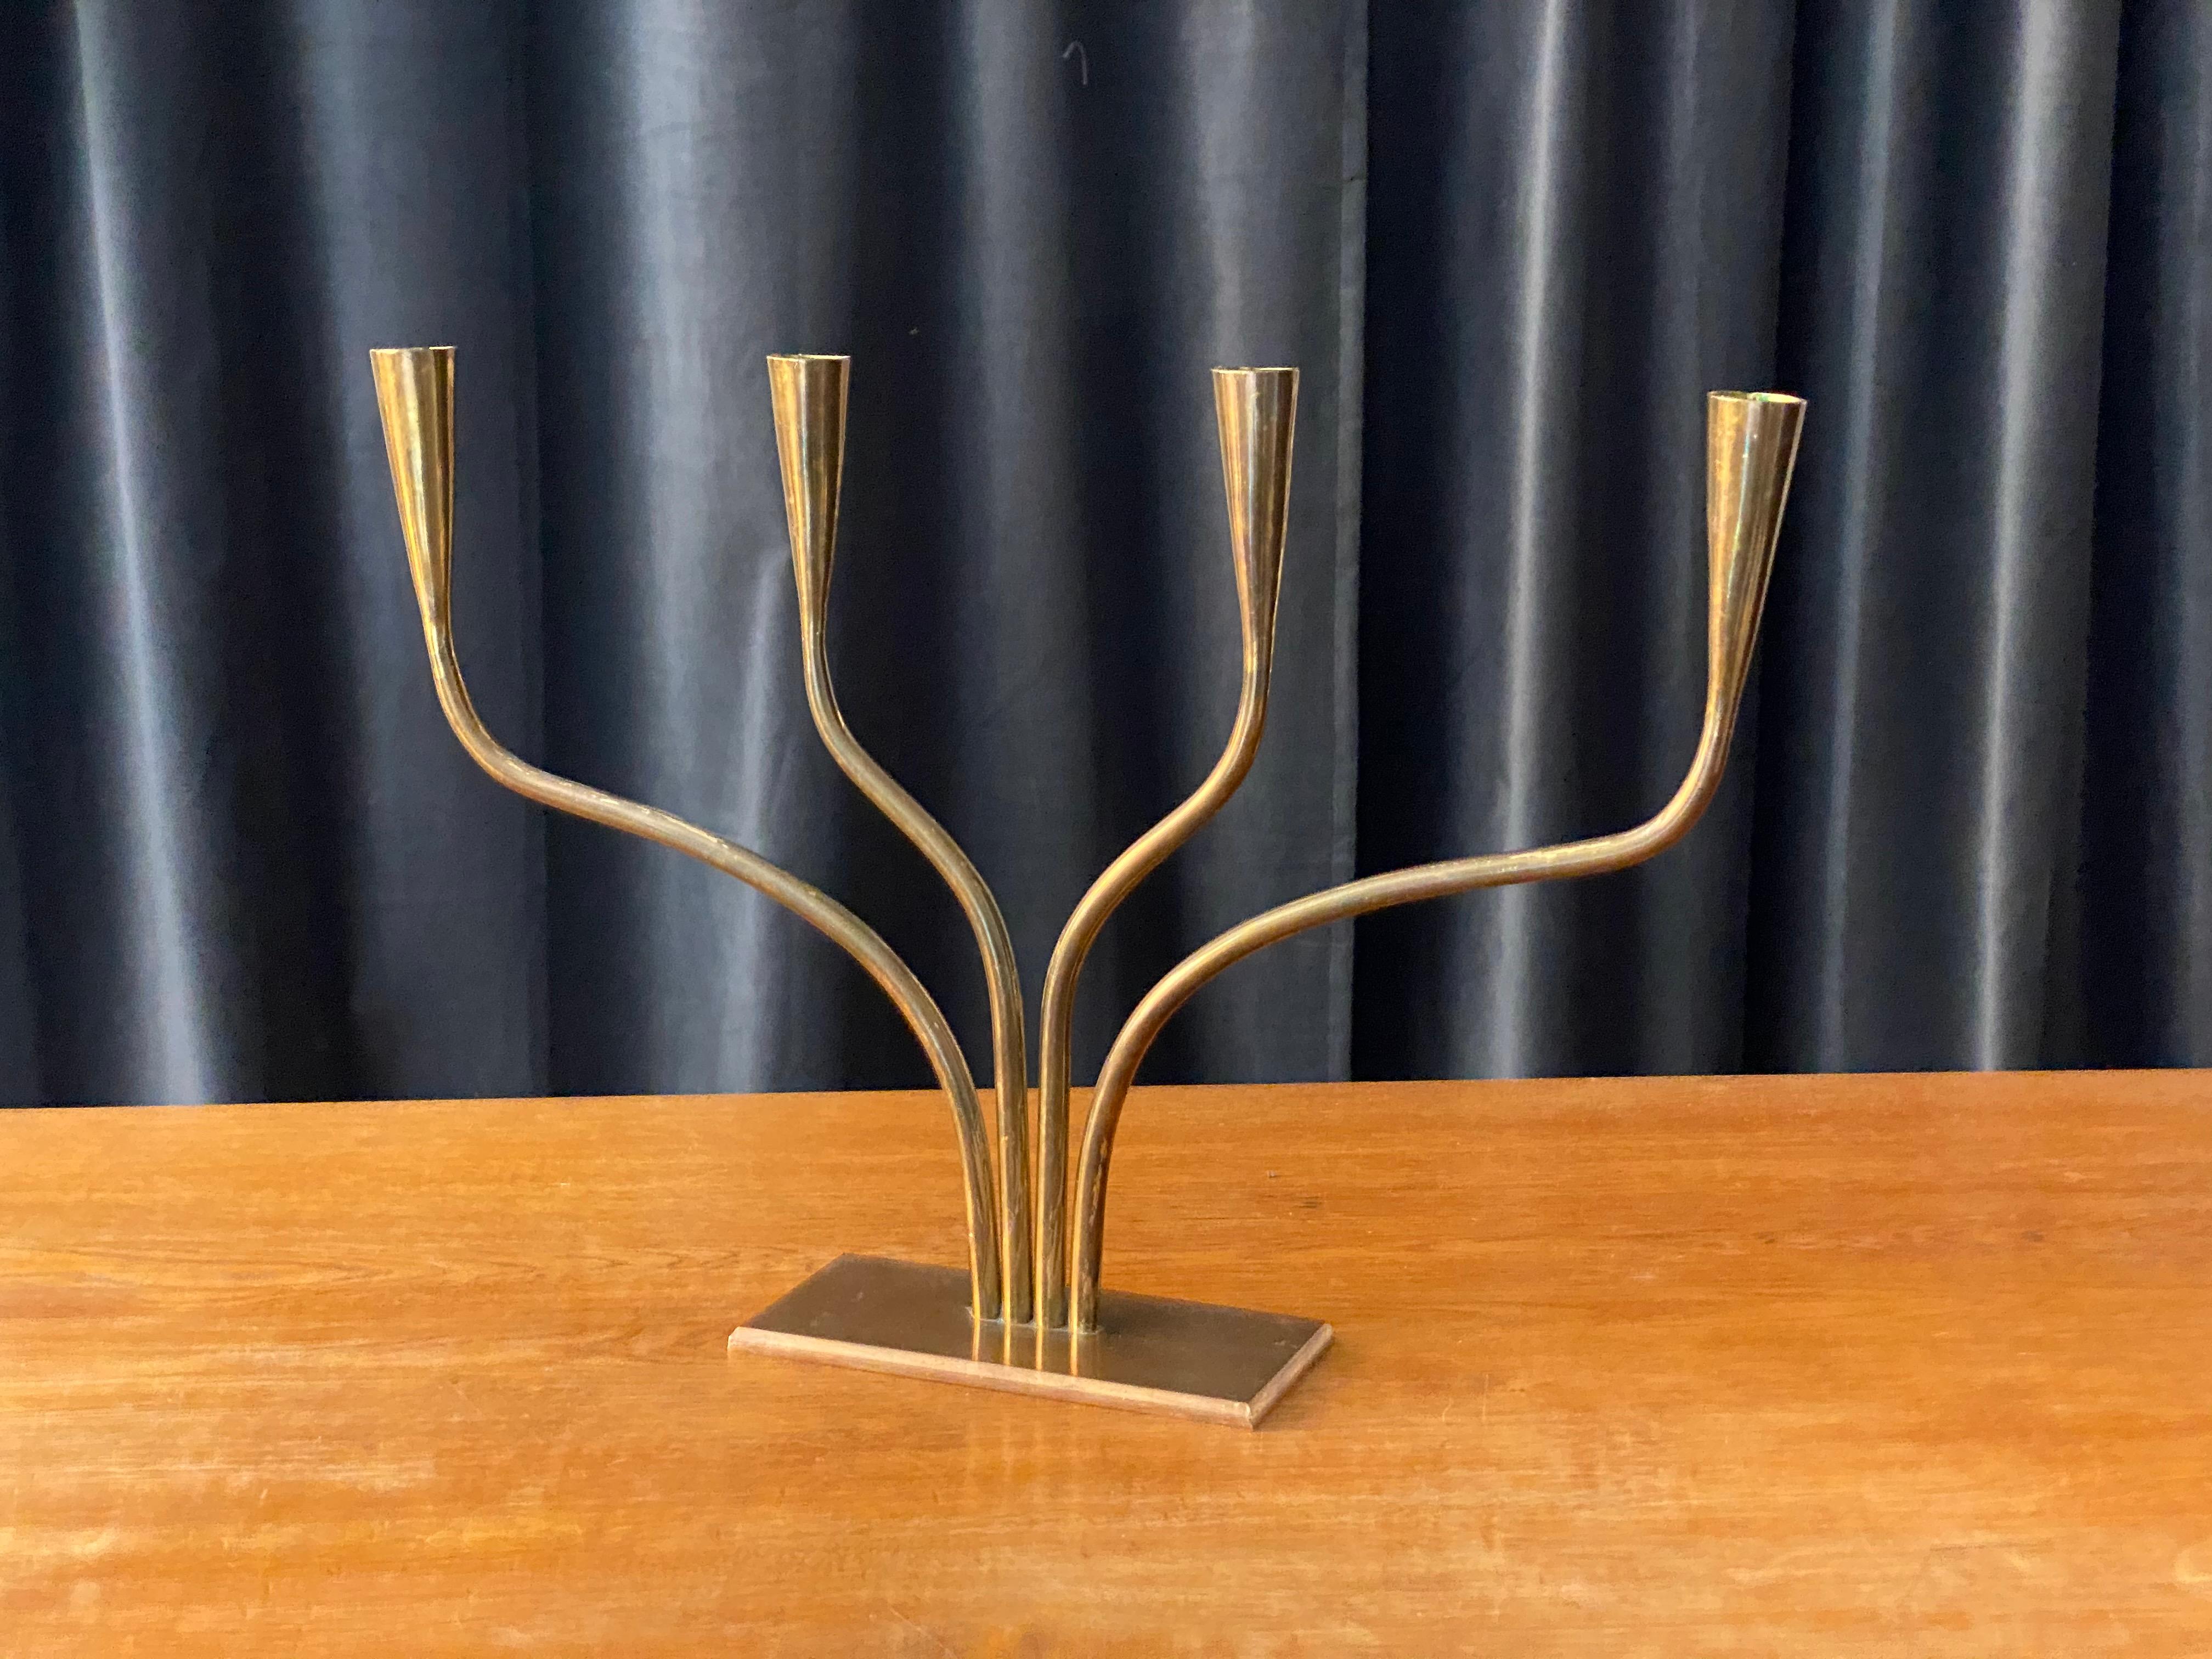 A highly modern and Minimalist candelabrum. Designed and produced in Sweden, 1940s.

Other designers of the period include Paavo Tynell, Piet Hein, G.A. Berg and Jean Royère.